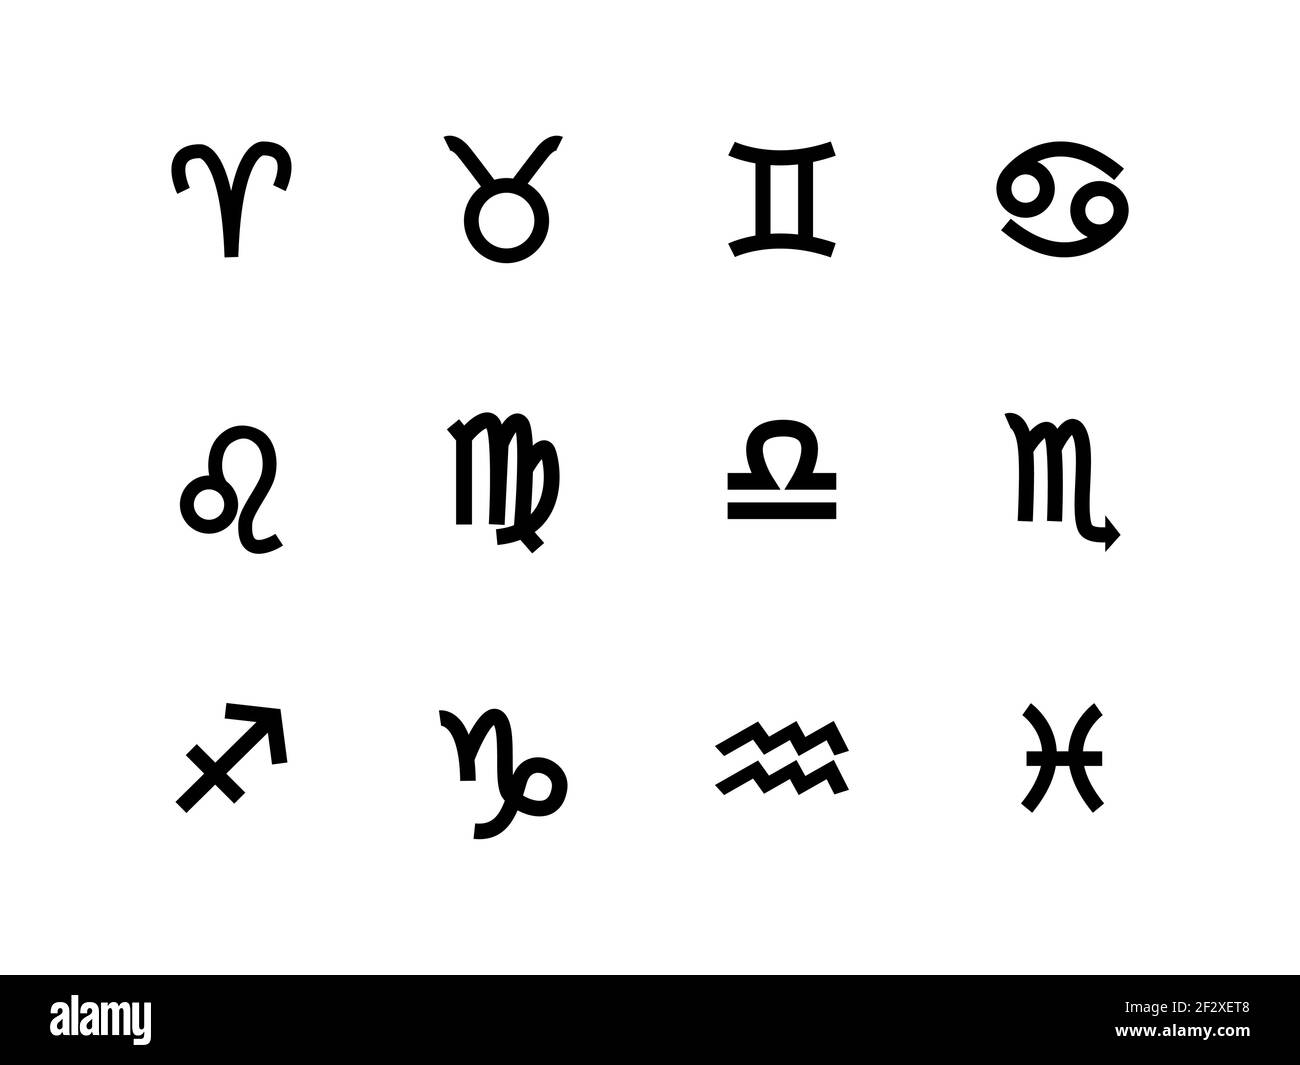 Zodiac sign set vector icons. Black astrological signs isolated on white background Stock Vector